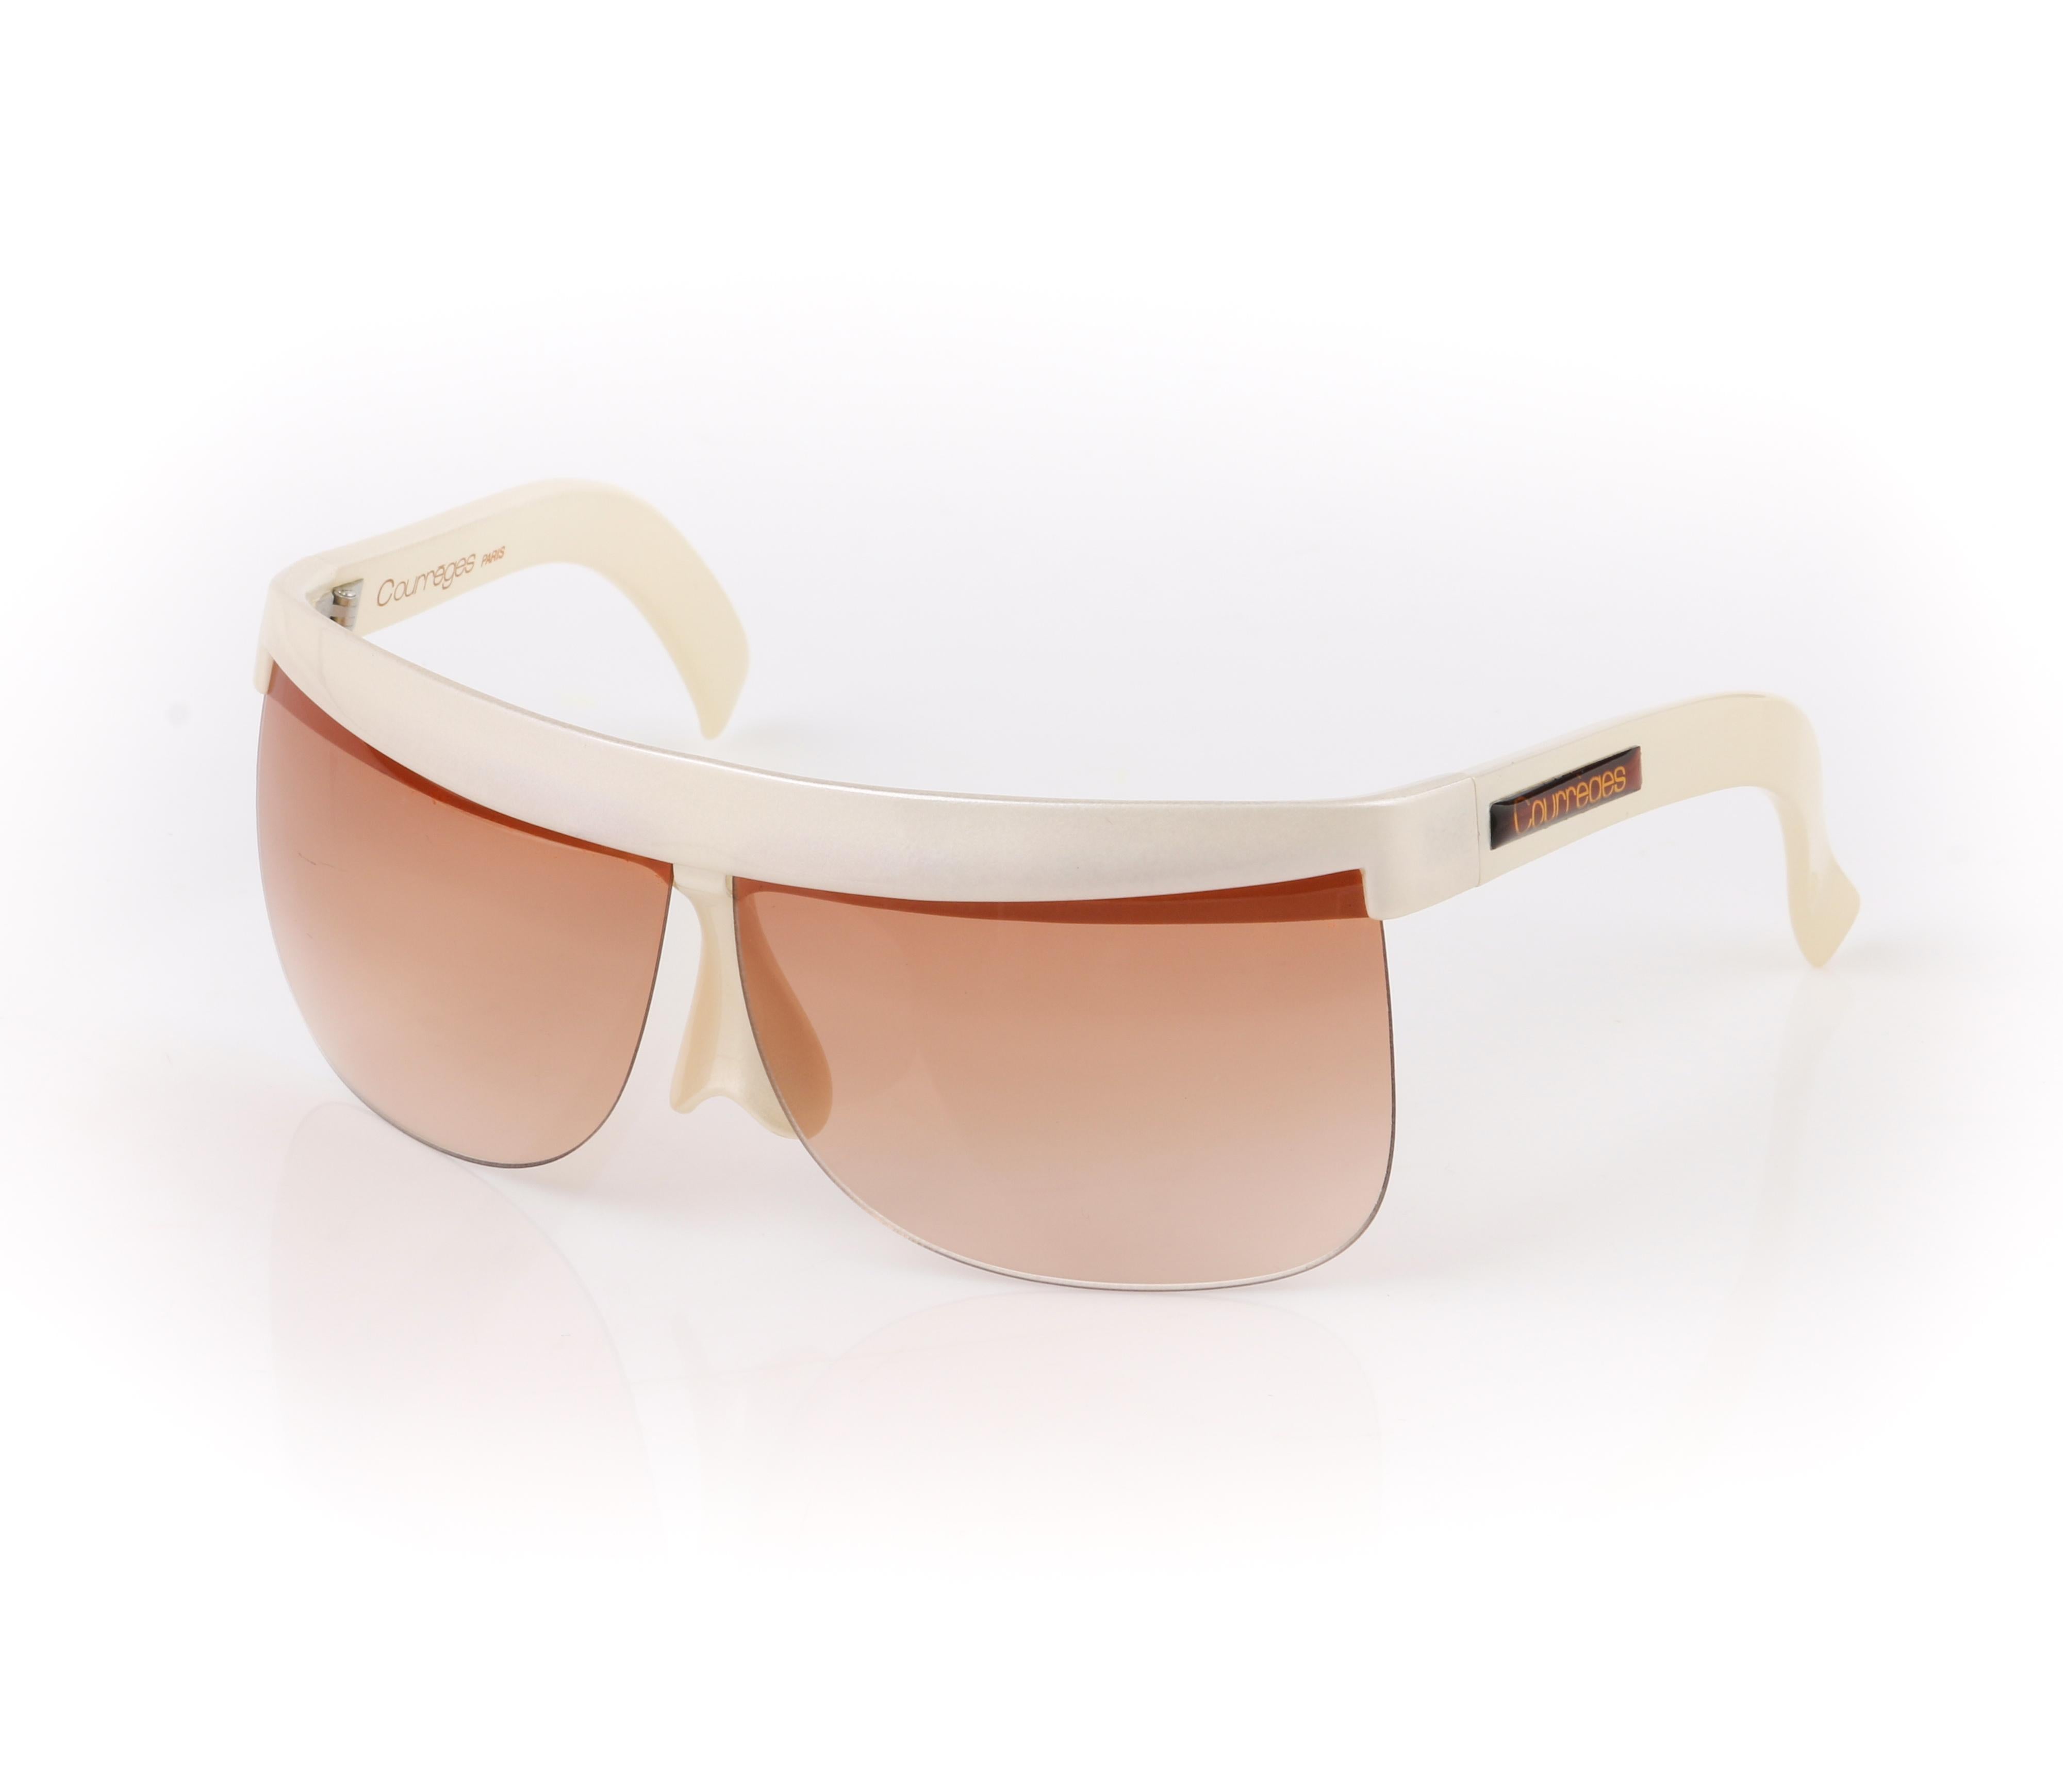 DESCRIPTION: COURREGES c.1970's Off White Plastic Half Frame Futuristic Sunglasses 7853
 
Circa: c.1970’s
Designer: Andre Courreges
Style: Half frame sunglasses
Color(s): Shades of off white and tan
Unmarked Material (feel of): Plastic
Additional